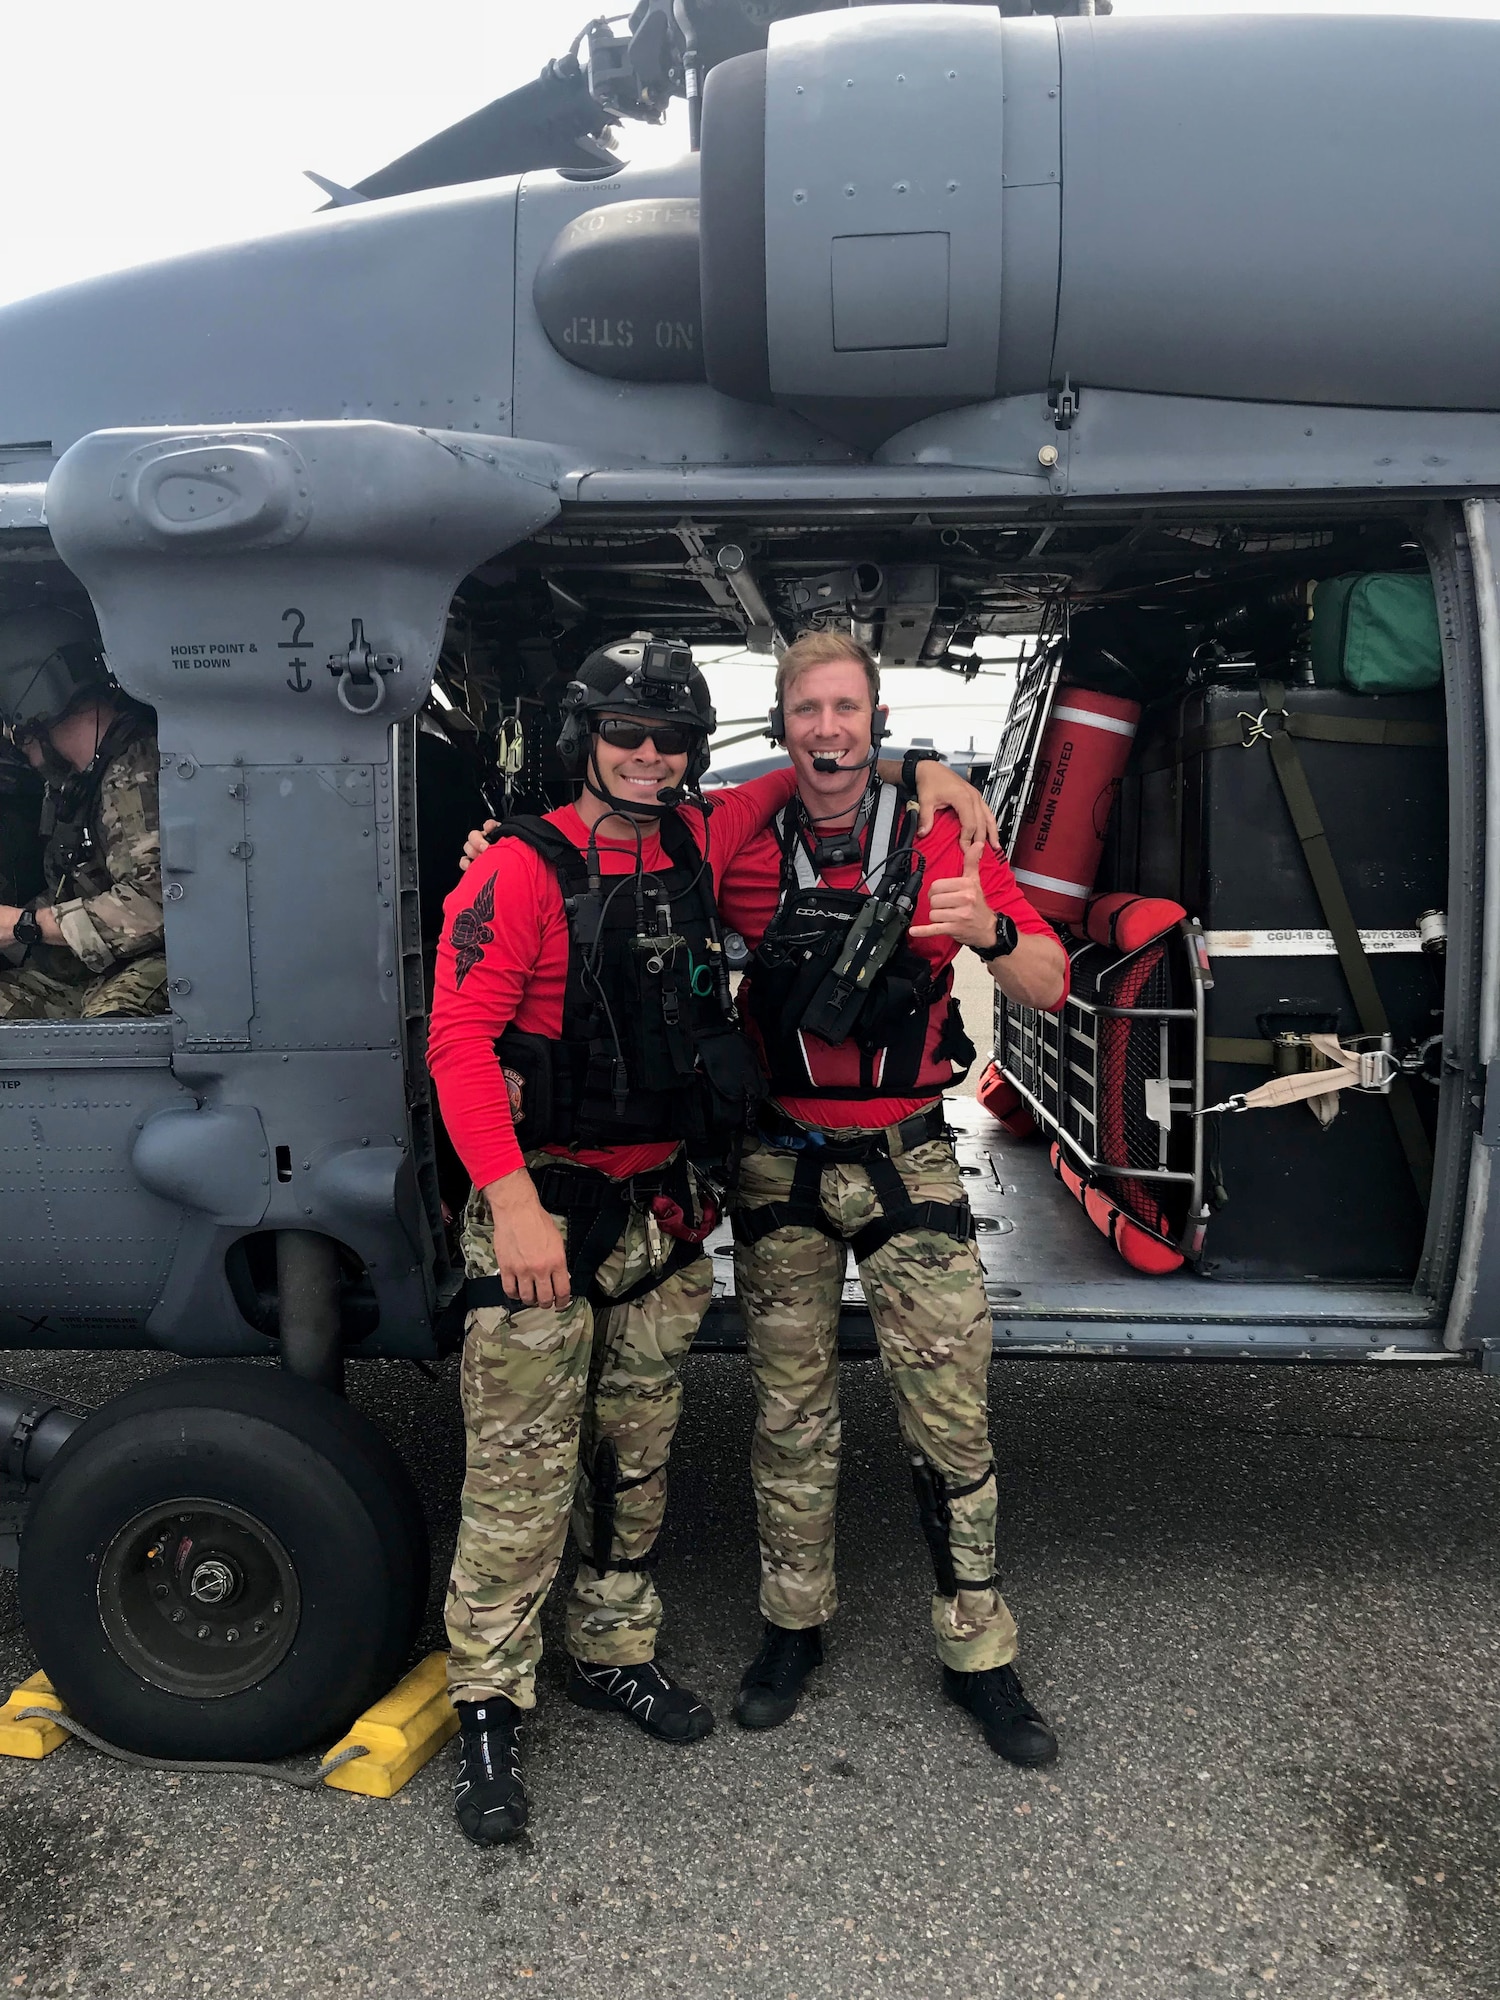 Air Force Reserve pararescuemen Senior Mastter Sgt. Joe Traska and Staff Sgt. Lucas Vannorsdall, 334th Air Expeditionary Group, take a moment to catch their breath after putting their readiness training in the keys on hold to posture for search-and-rescue operations at Joint Base Charleston, South Carolina in the wake of Hurricane Florence. Pararescuemen are highly trained combat rescue specialists. (U.S. Air Force photo by Tech. Sgt. Kelly Goonan)